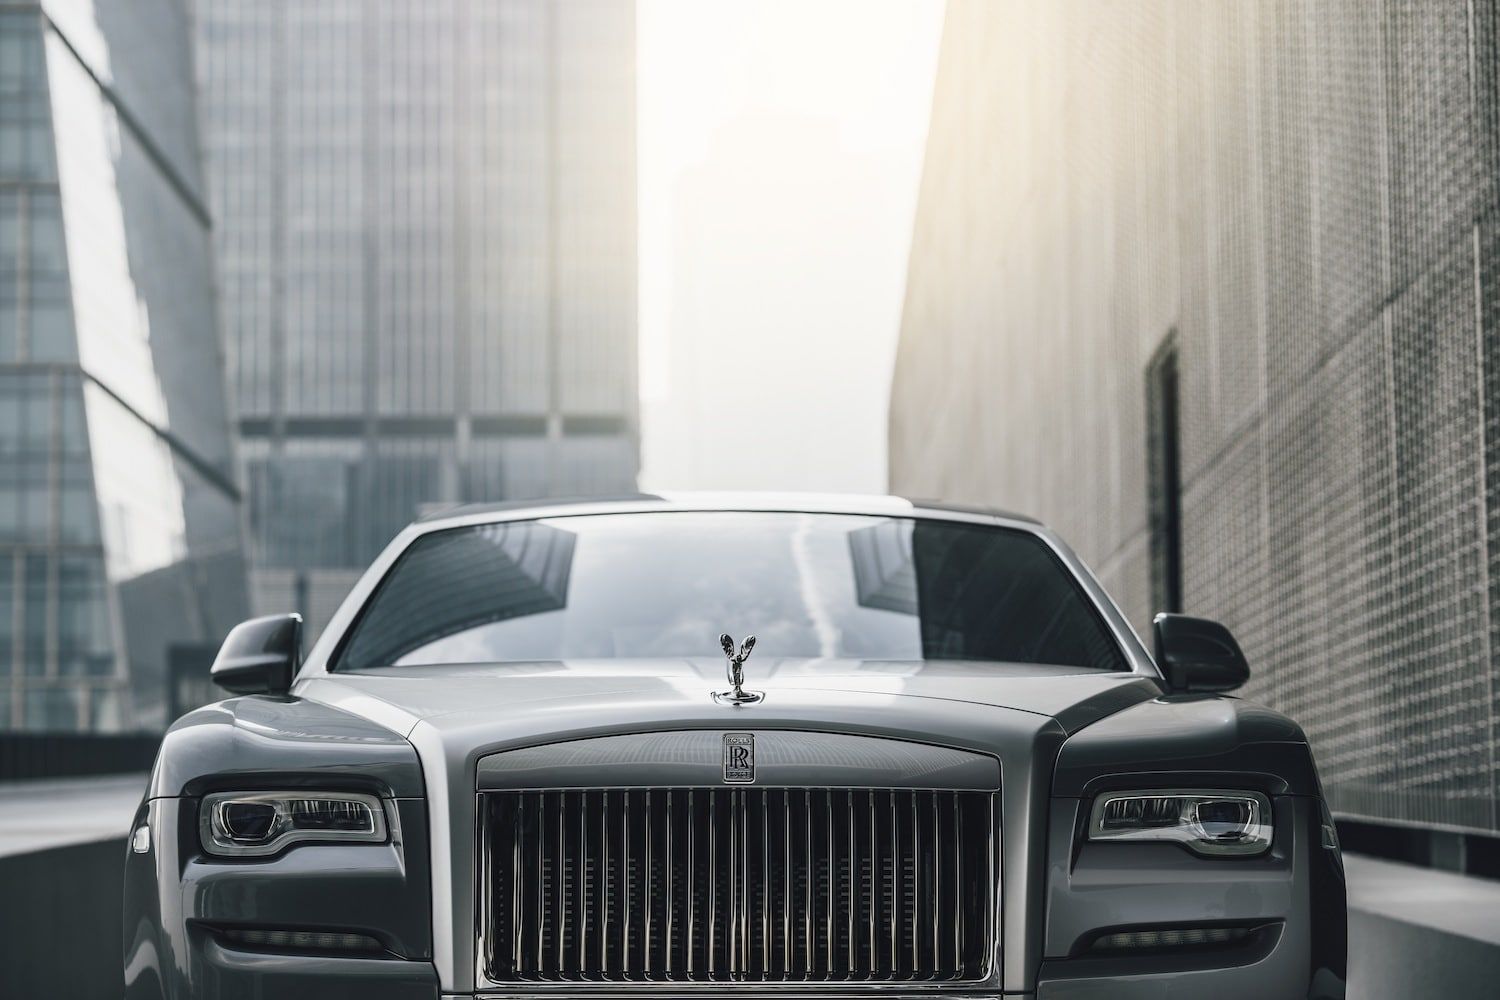 The History Of The Name Of The RollsRoyce Spectre